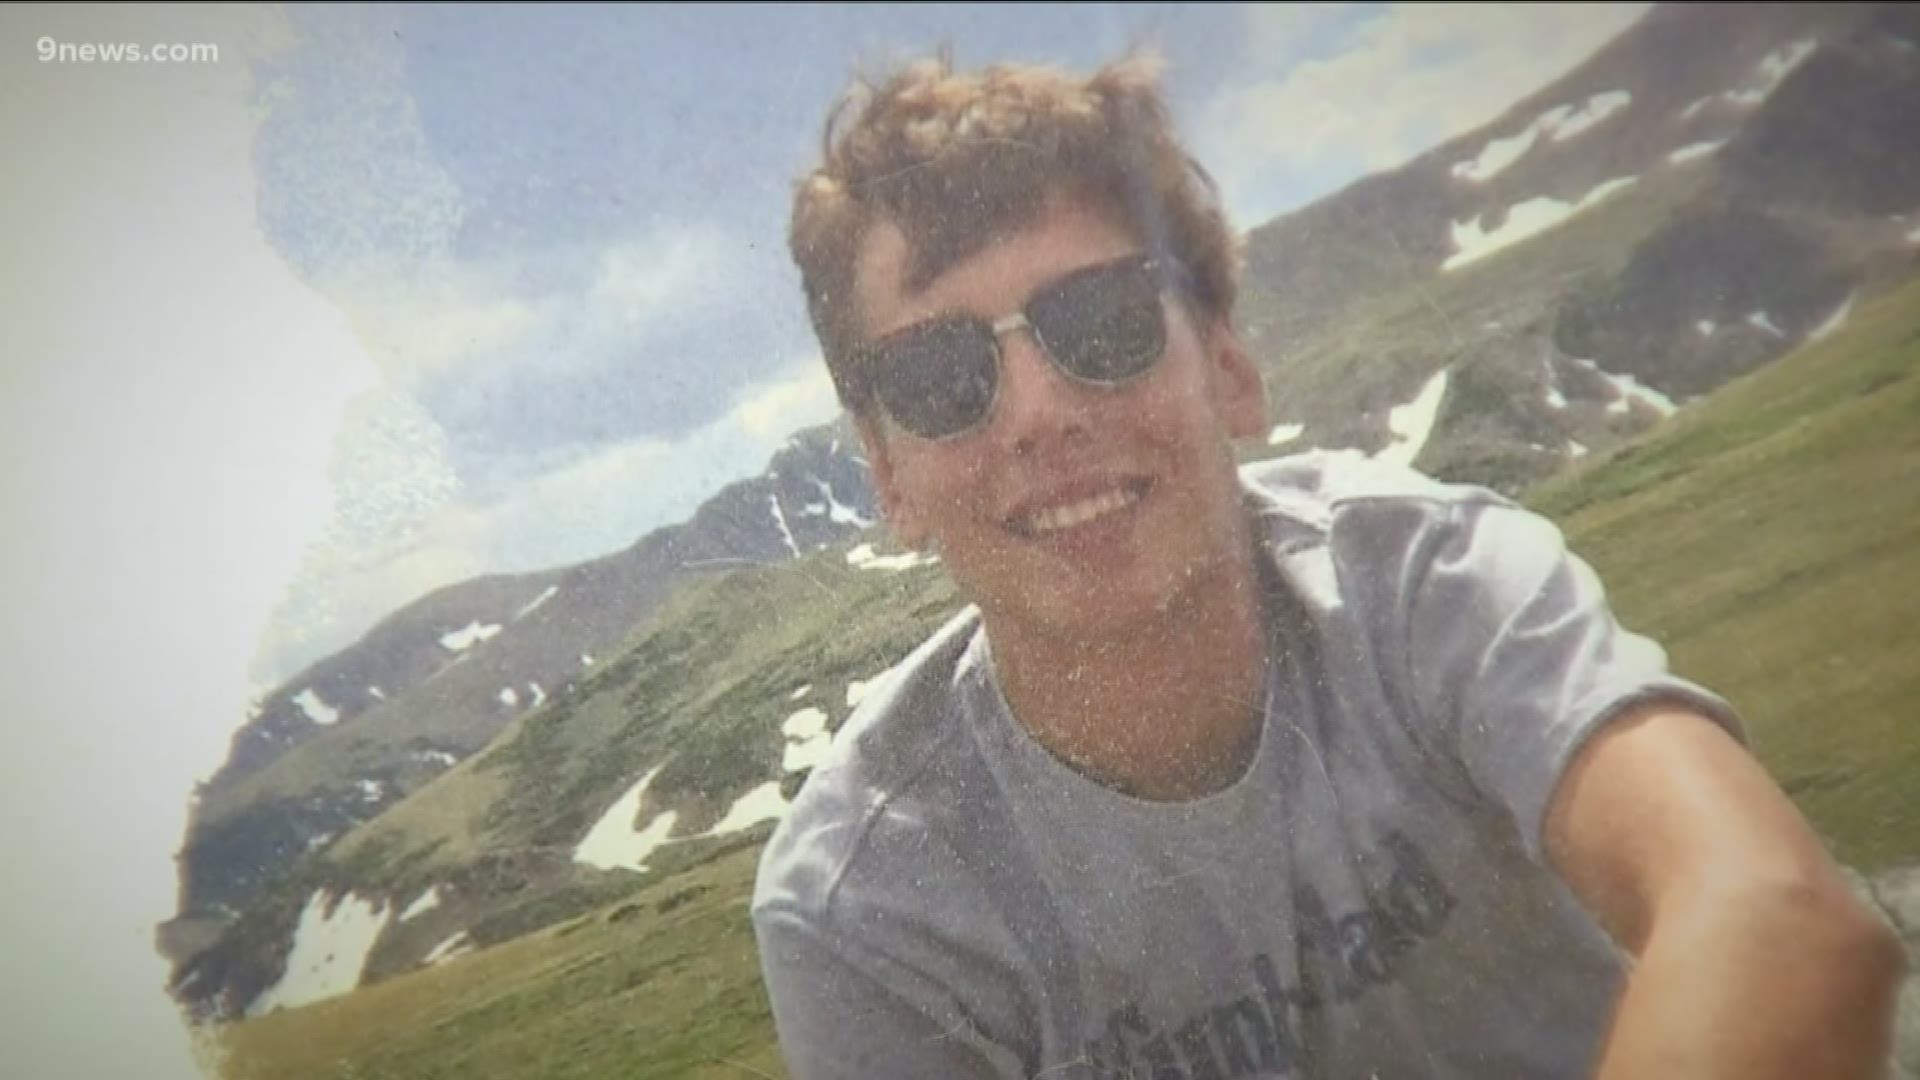 Police made mistakes, and it means the family of a 21-year-old CSU student killed in an accidental shooting last year may never know what really happened that night.